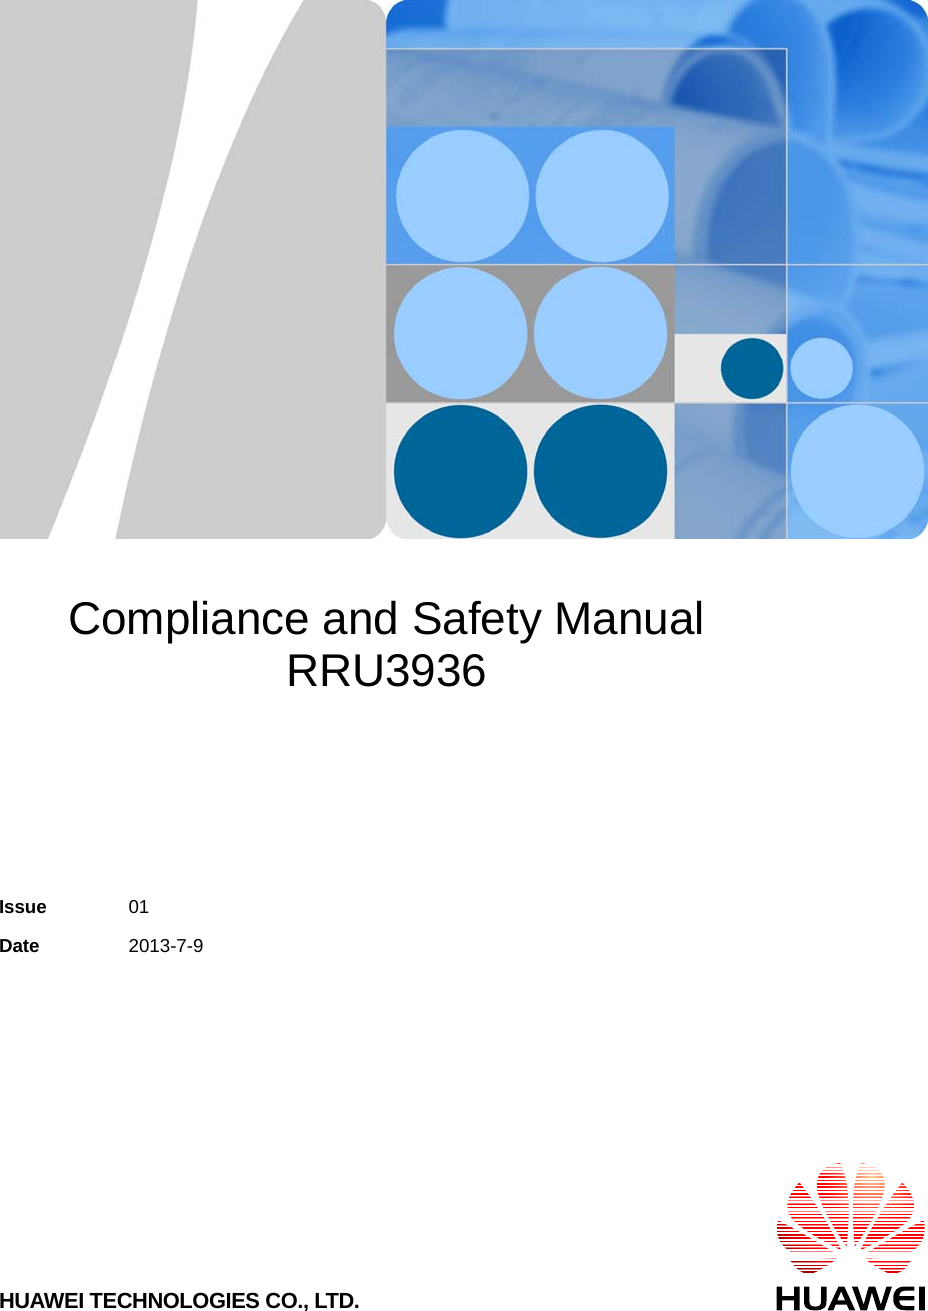       Compliance and Safety Manual RRU3936    Issue  01 Date  2013-7-9 HUAWEI TECHNOLOGIES CO., LTD. 